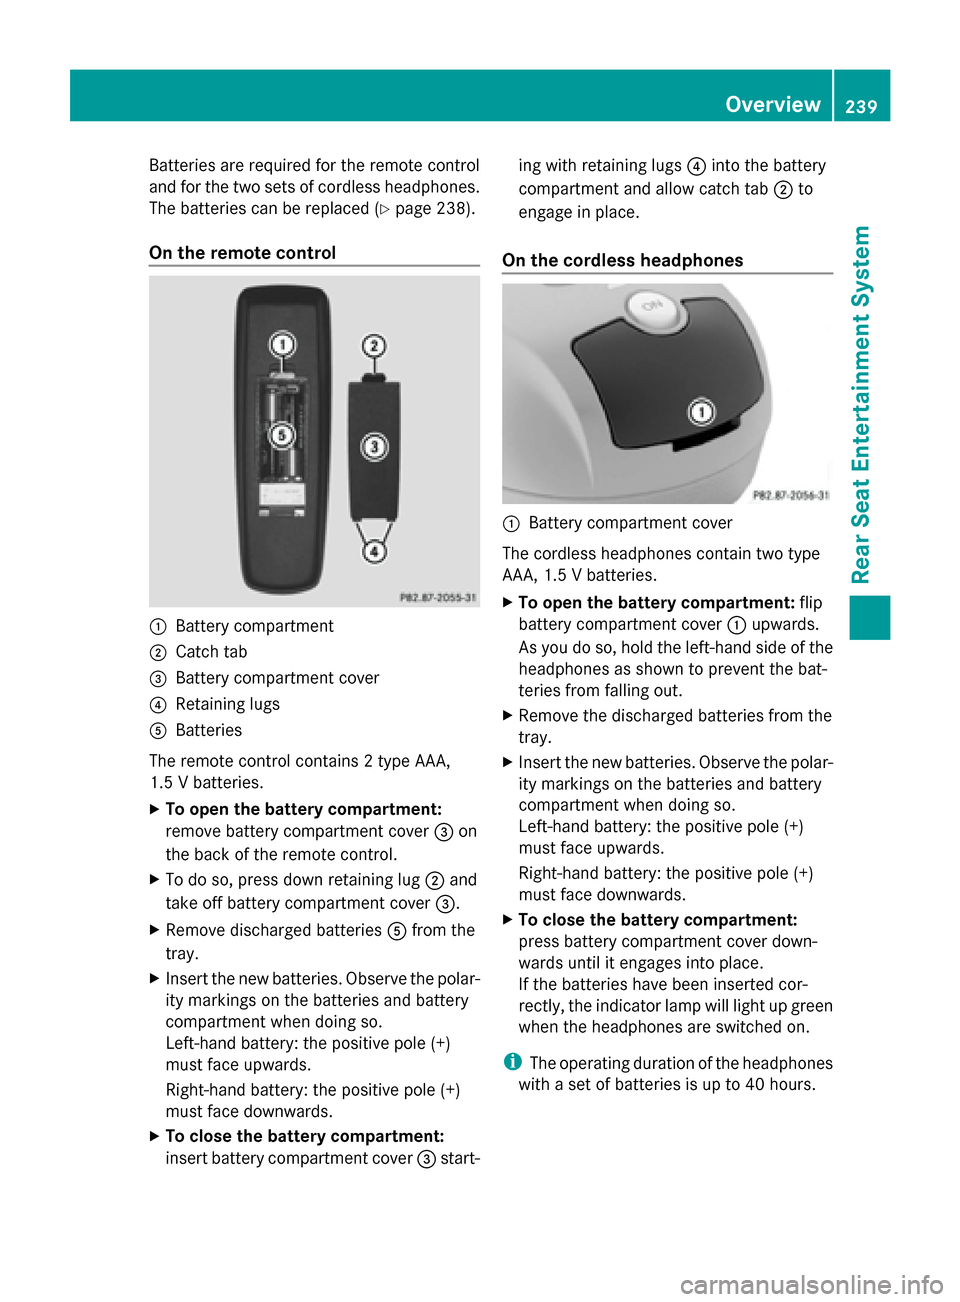 MERCEDES-BENZ M-Class 2014 W166 Comand Manual Batteries are required for the remote control
and for the two sets of cordless headphones.
The batteries can be replaced (Y page 238).
On the remote control 0043
Battery compartment
0044 Catch tab
008